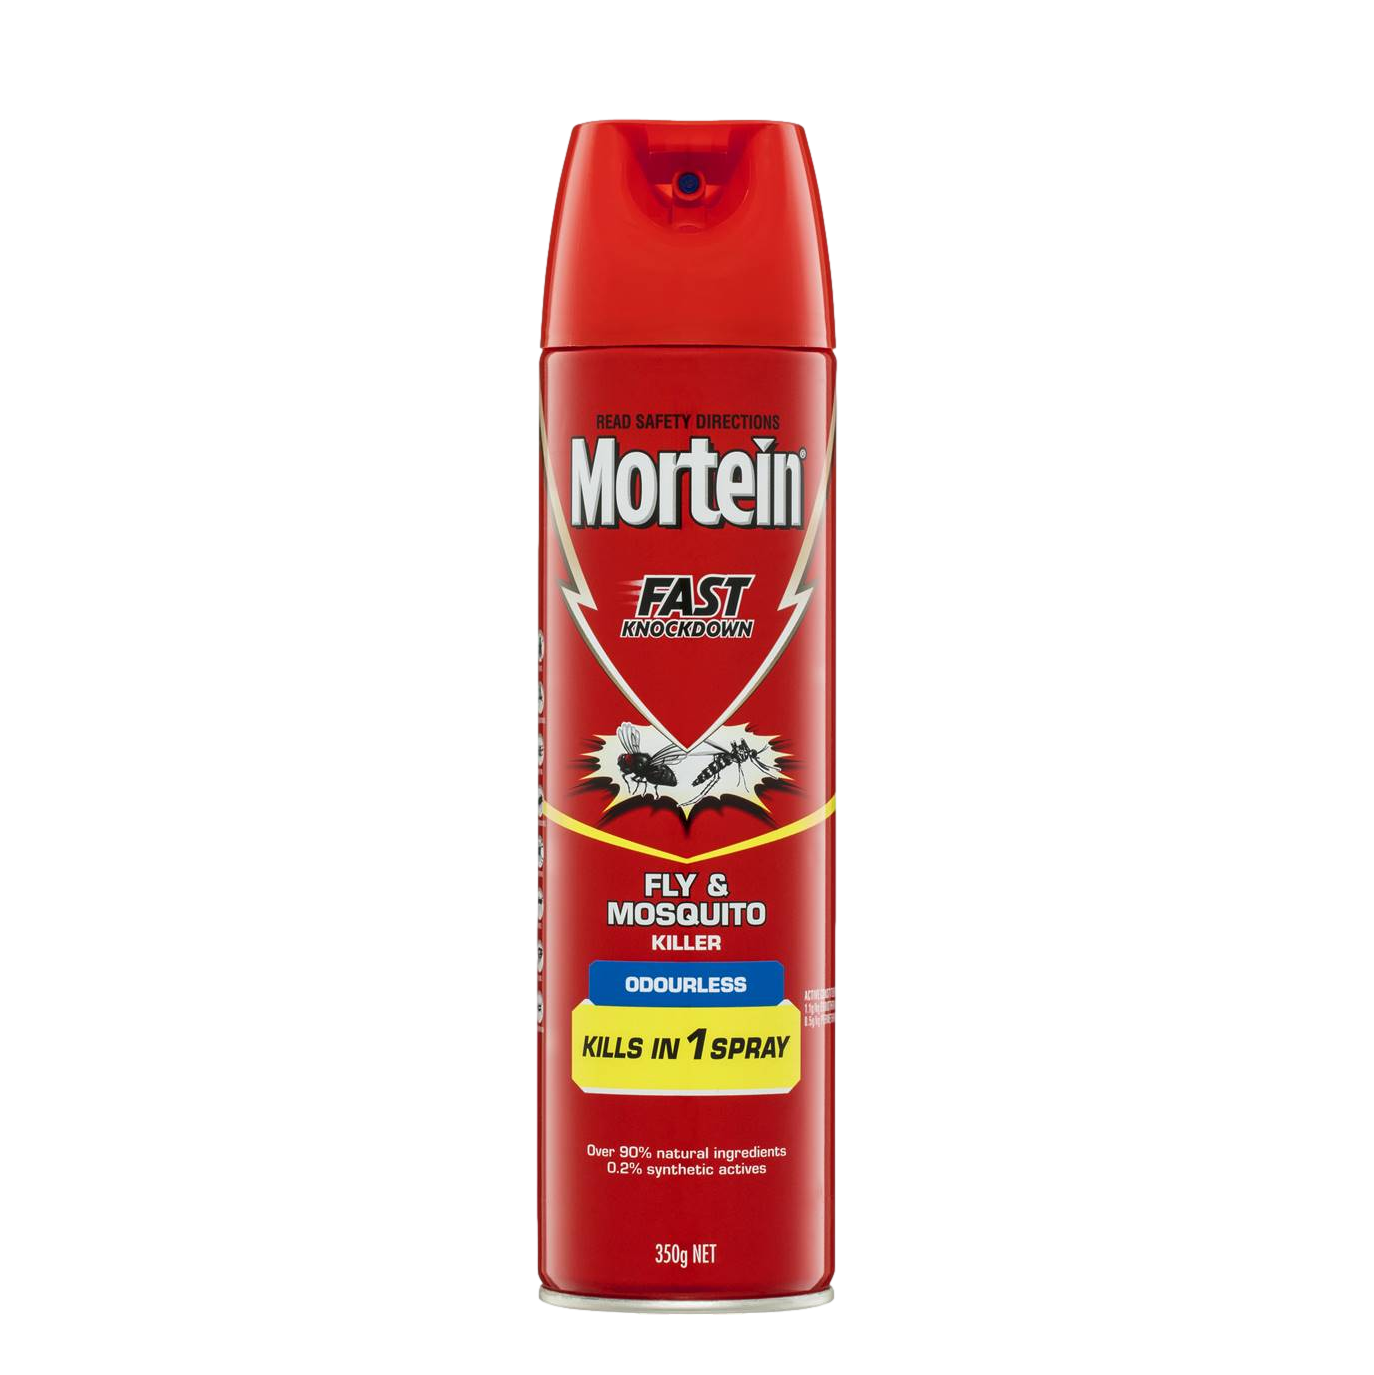 Mortein Fast Knockdown Fly & Mosquito Odourless 350g